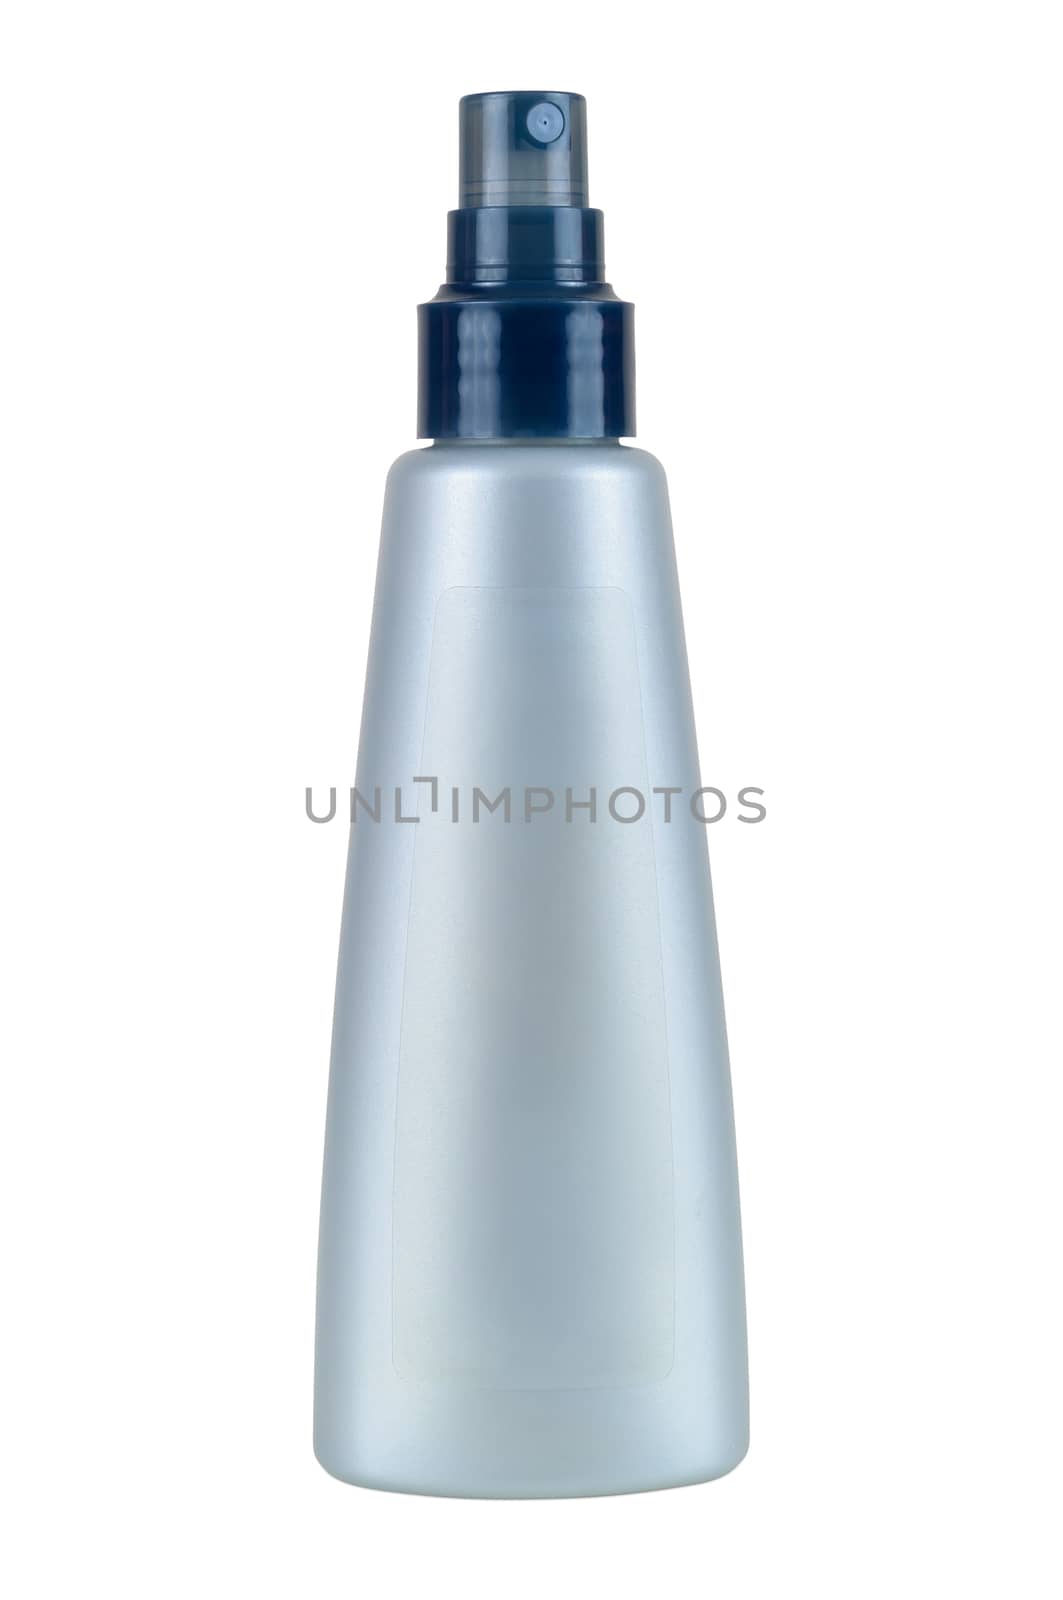 Plastic cosmetic bottle isolated on white background with clipping path